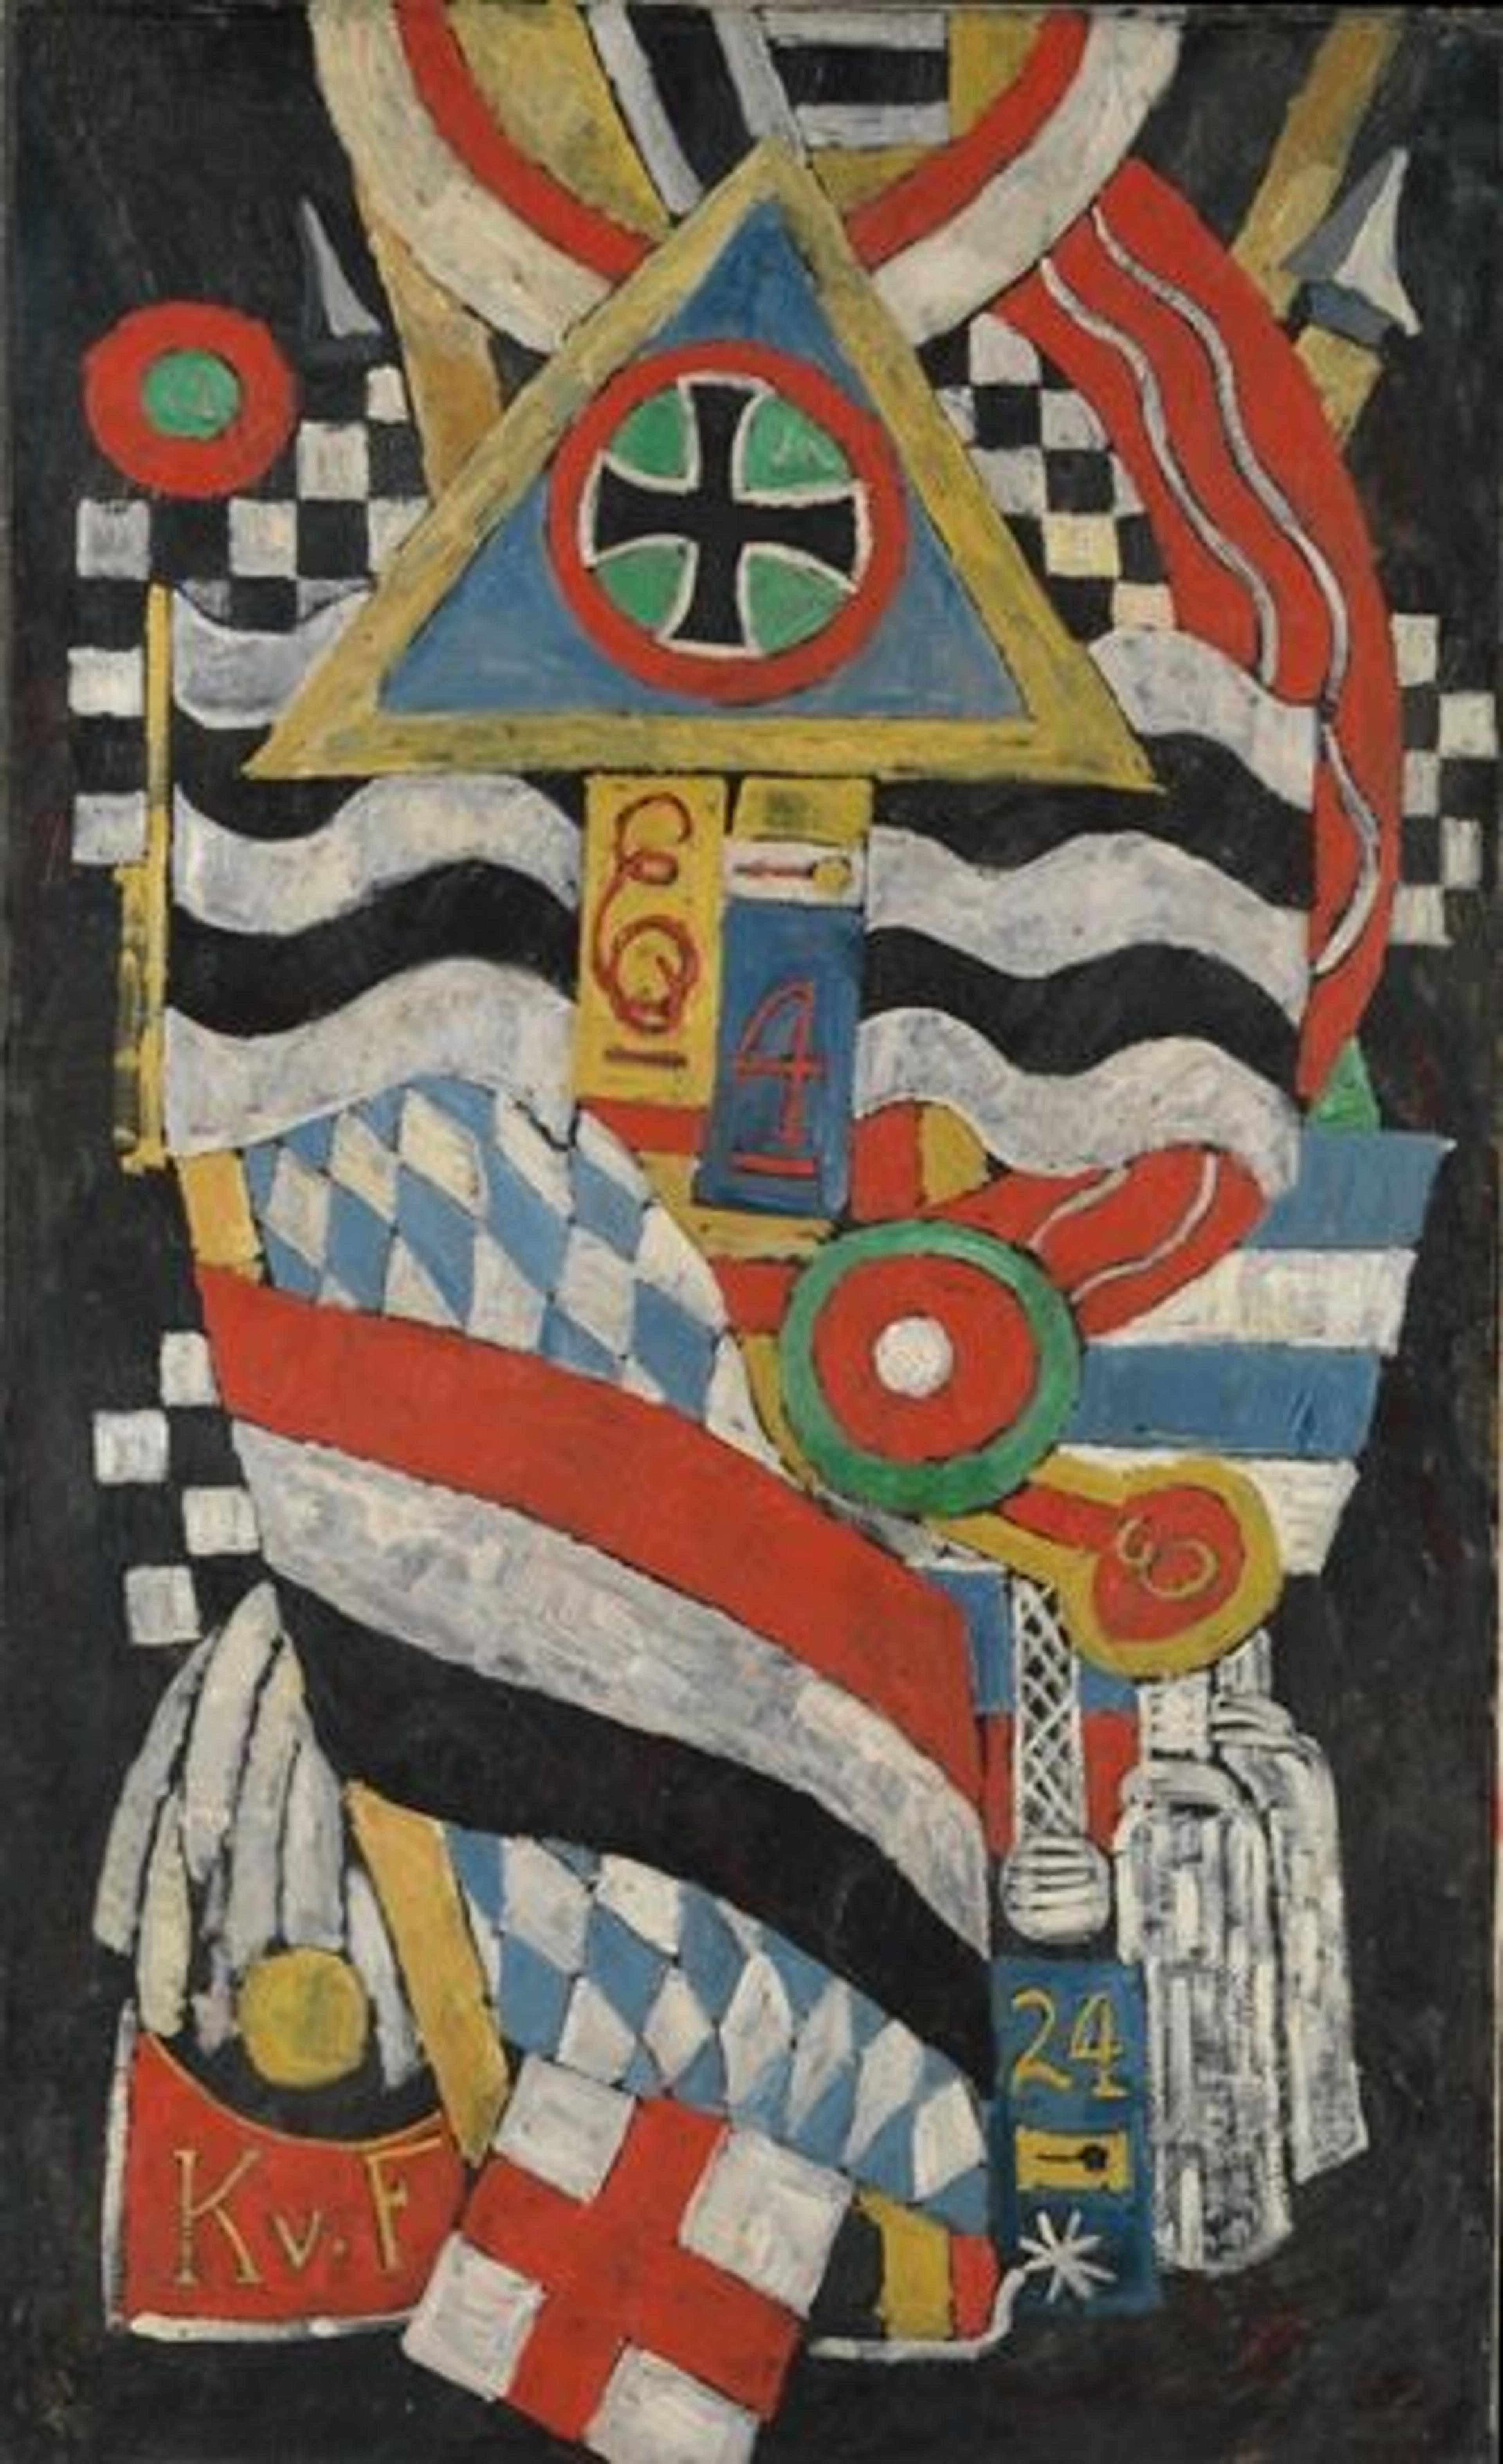 Portrait of Karl von Freyburg by Marsden Hartley, executed in a German Expressionist meets Cubist style